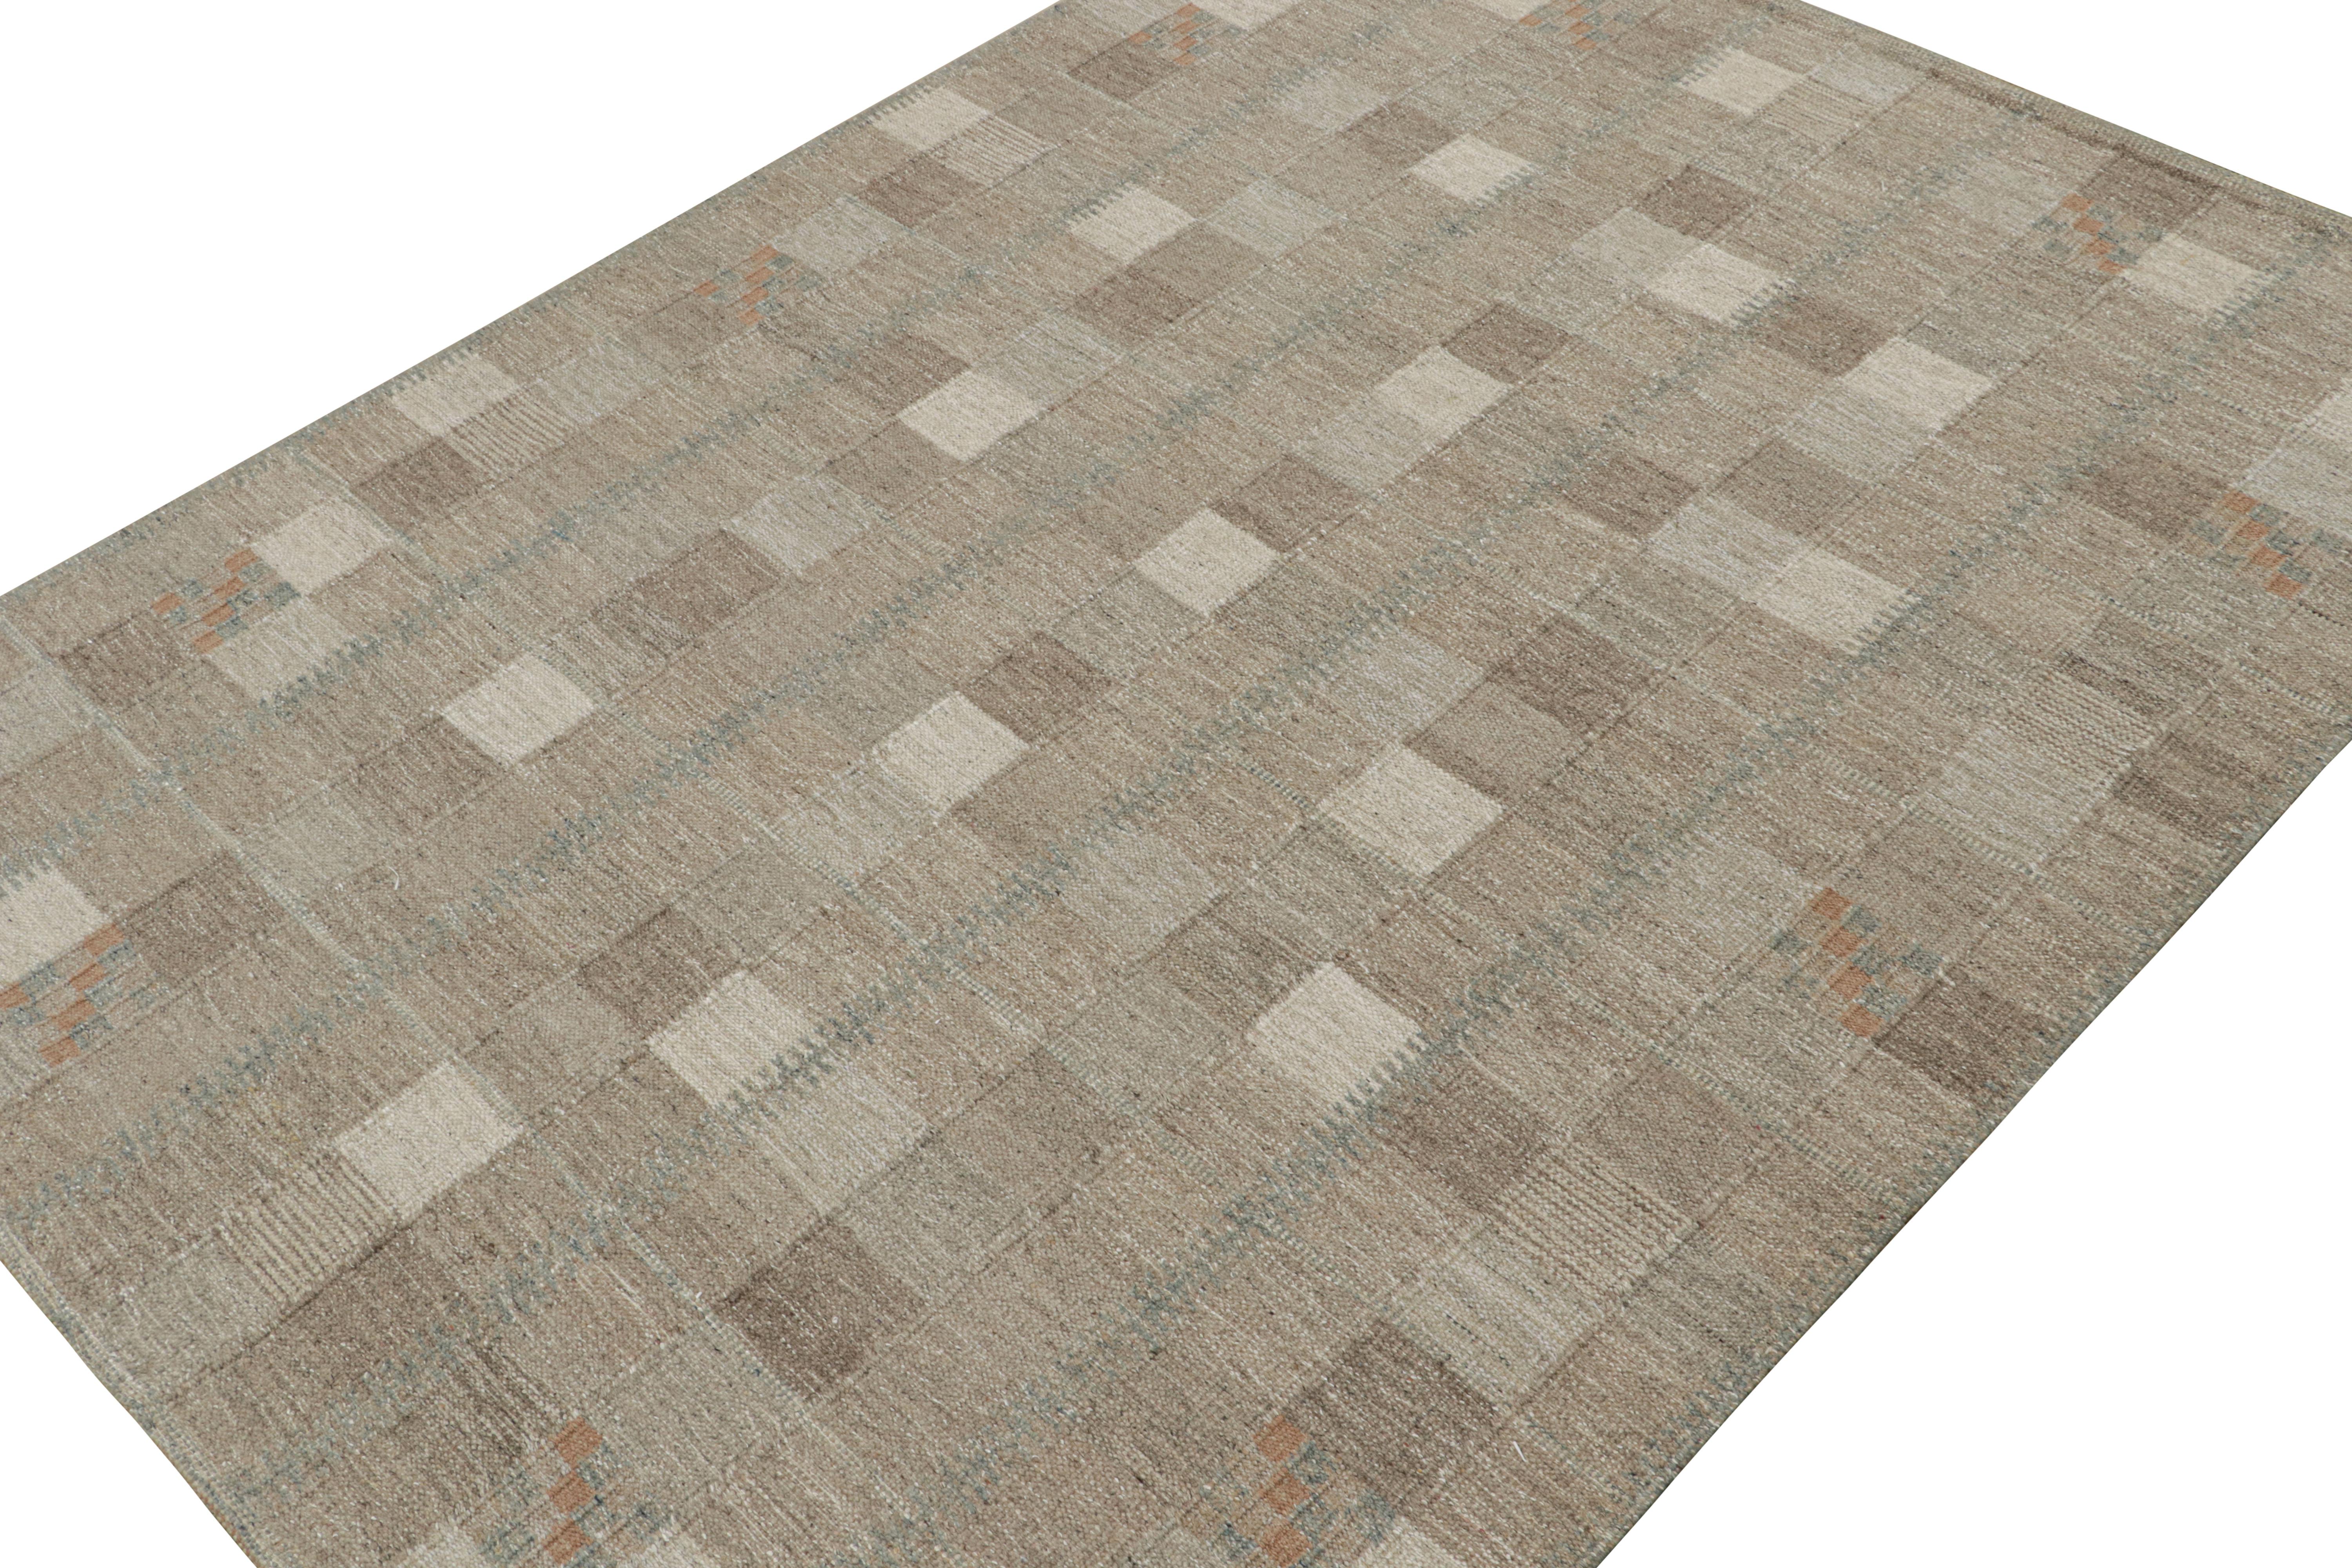 A smart 9x12 Swedish style kilim rug from our award-winning Scandinavian flat weave collection. Handwoven in wool, cotton & undyed natural yarn.

On the Design: 

This rug enjoys geometric patterns in brown & gray. Keen eyes will admire undyed,